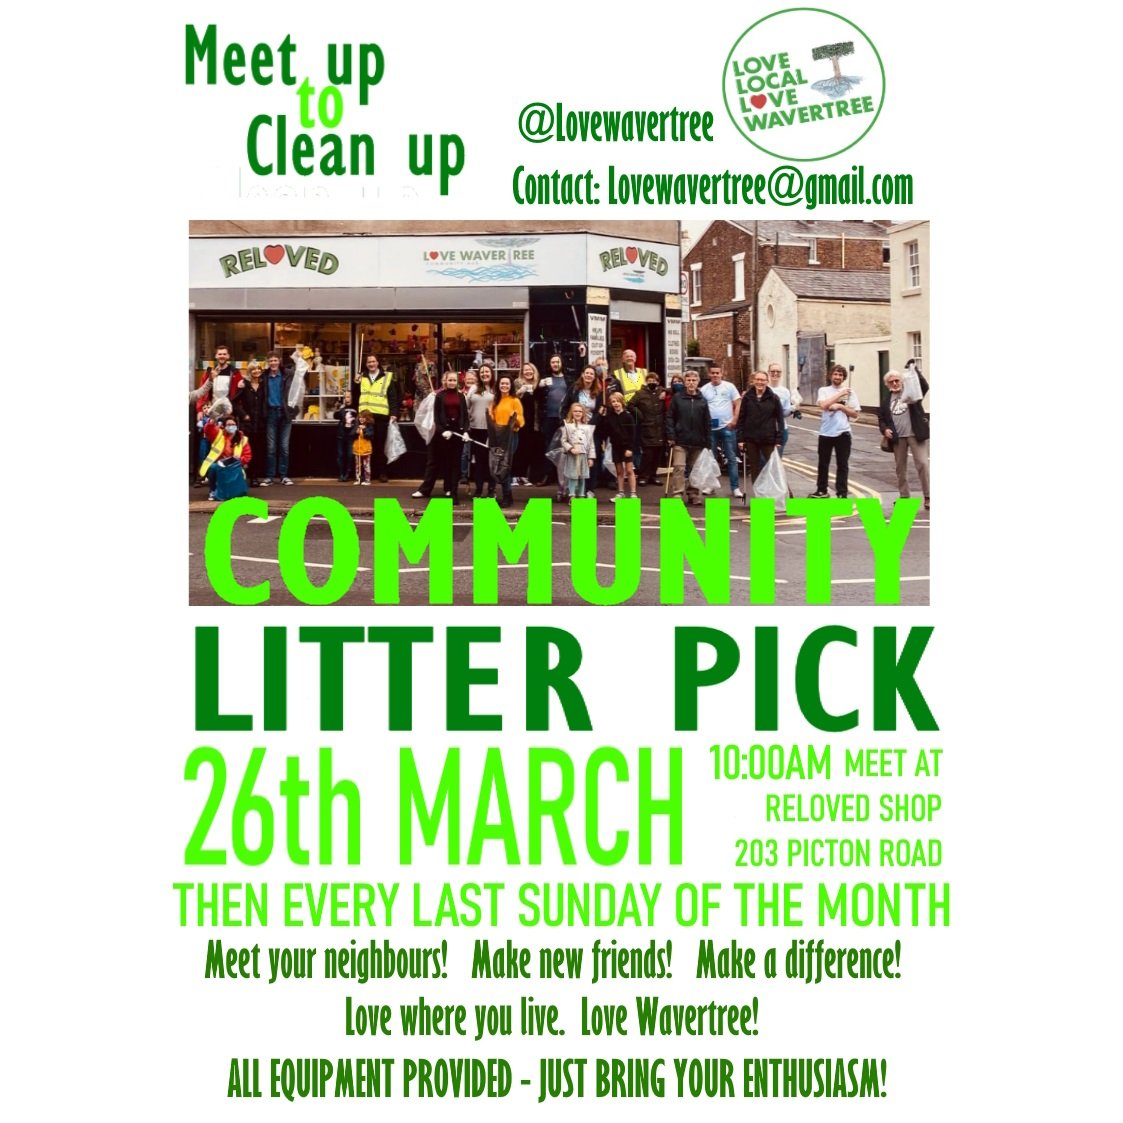 A @LoveWavertree Community Litterpick takes place this Sunday, 26 Mar. Meet at 10am outside the #ReLoved shop, 203 Picton Road #Liverpool L15 4LG